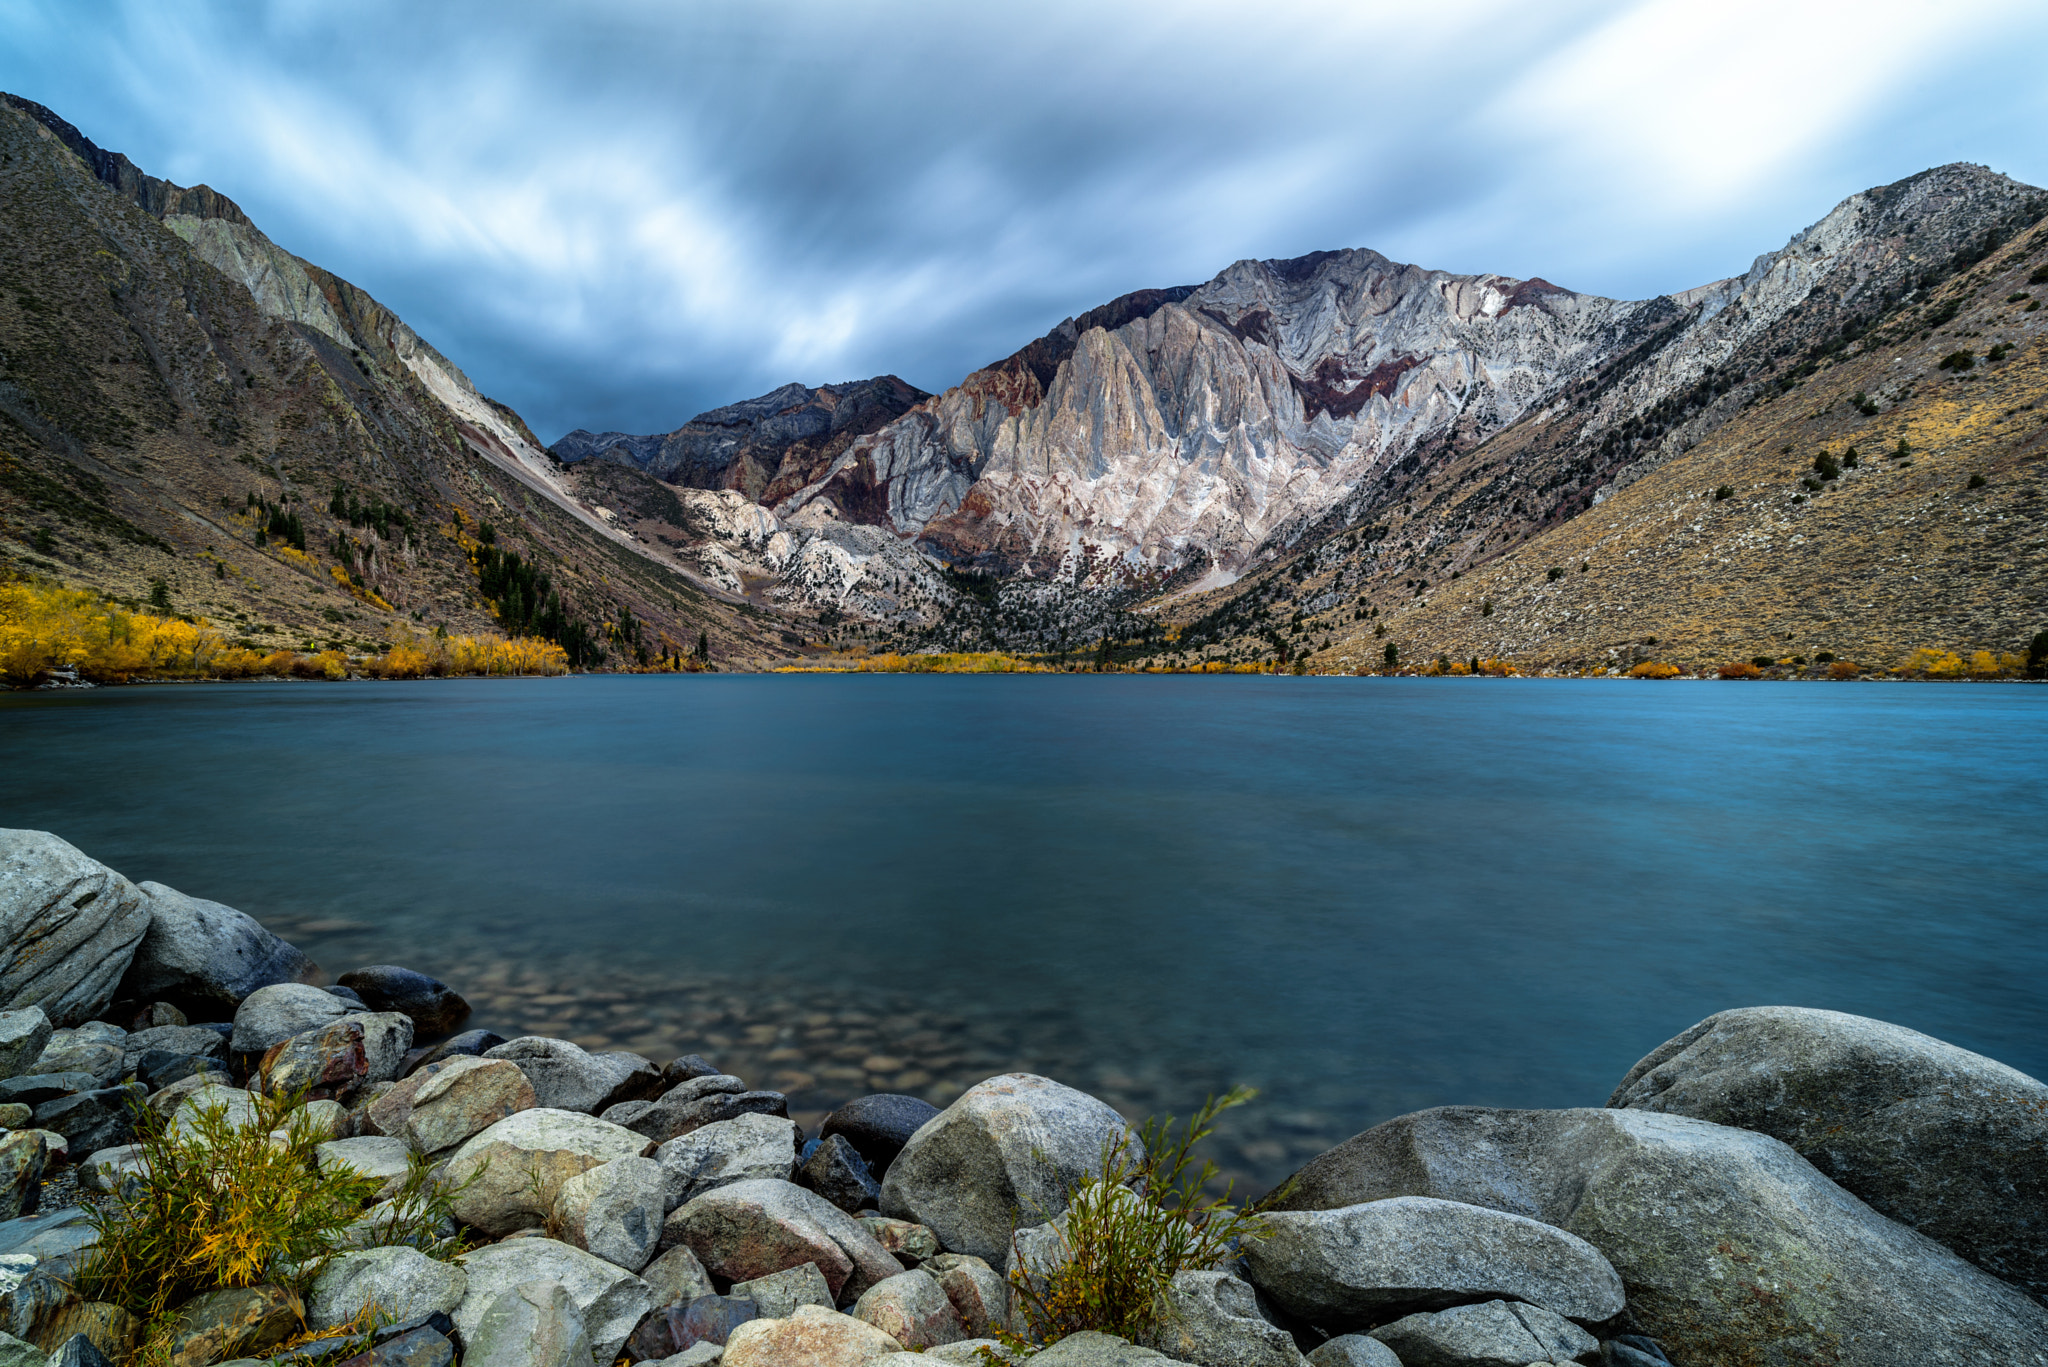 ZEISS Milvus 21mm F2.8 sample photo. Convict lake photography